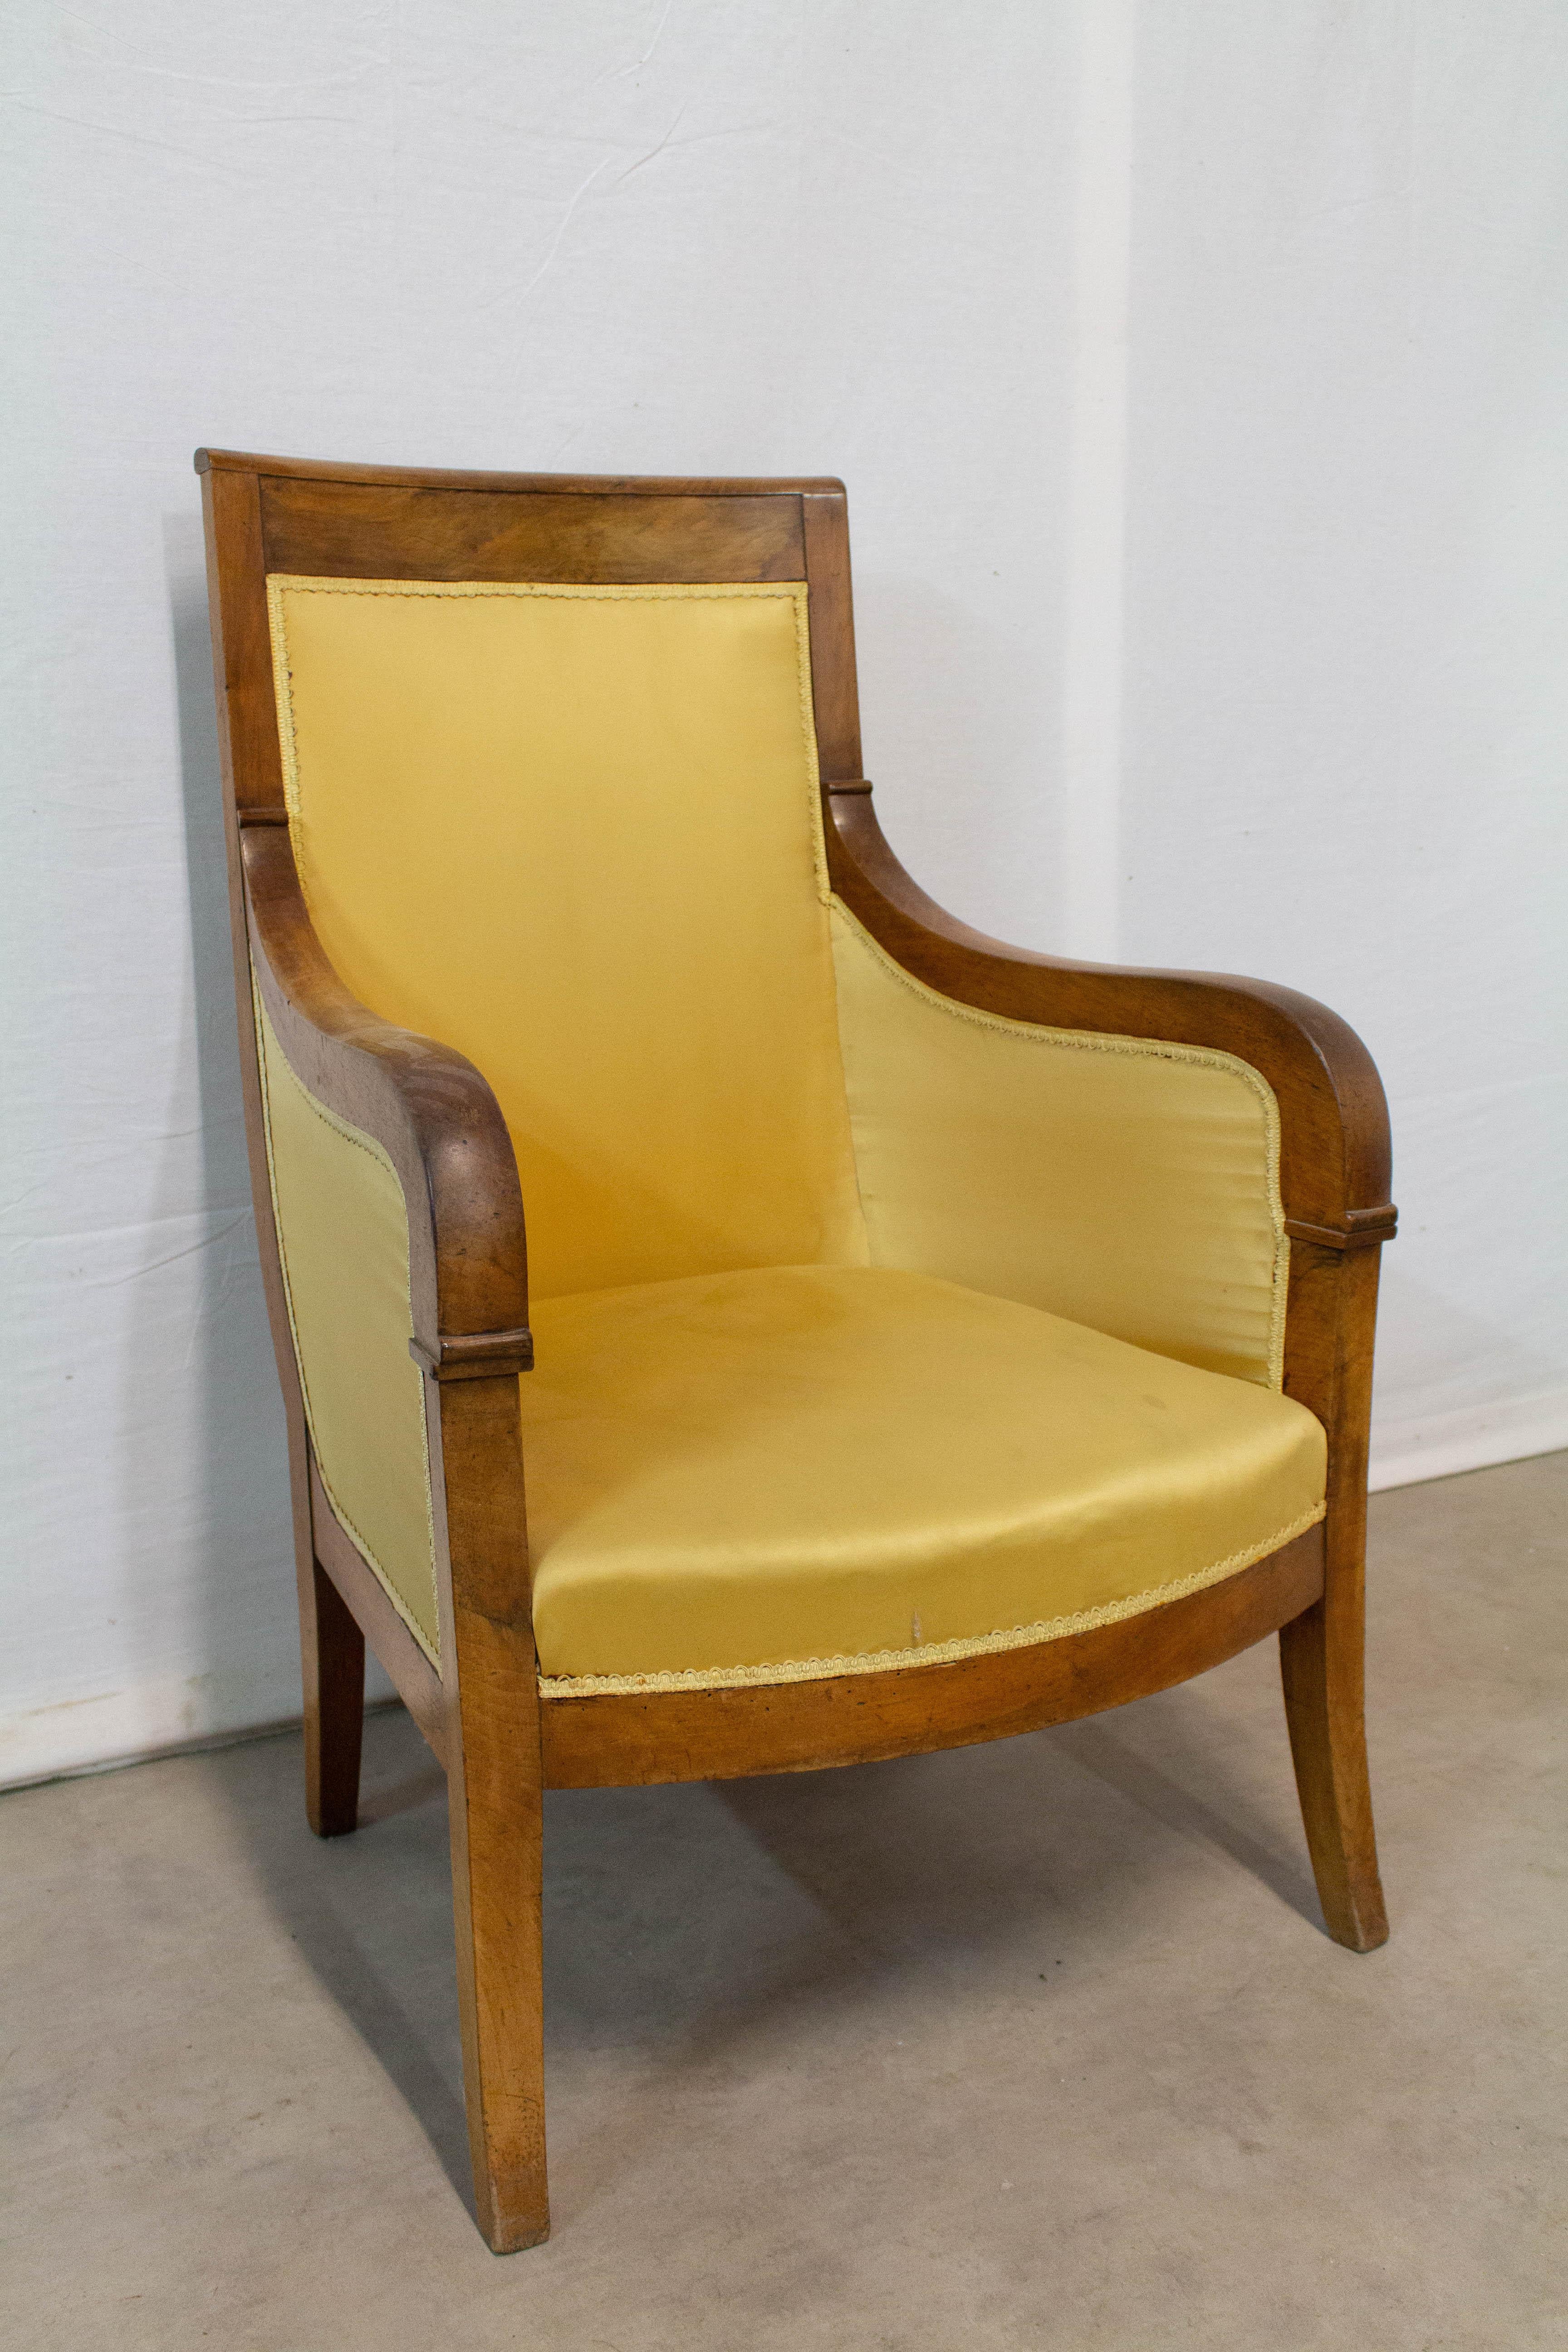 Armchair French Directoire 19th century fauteuil
Walnut
This fauteuil has to be re-upholstered
Good antique patina
Sound and solid.
 
For shipping:
Measures: L 65 x H 98 x P 64cm 13kg.